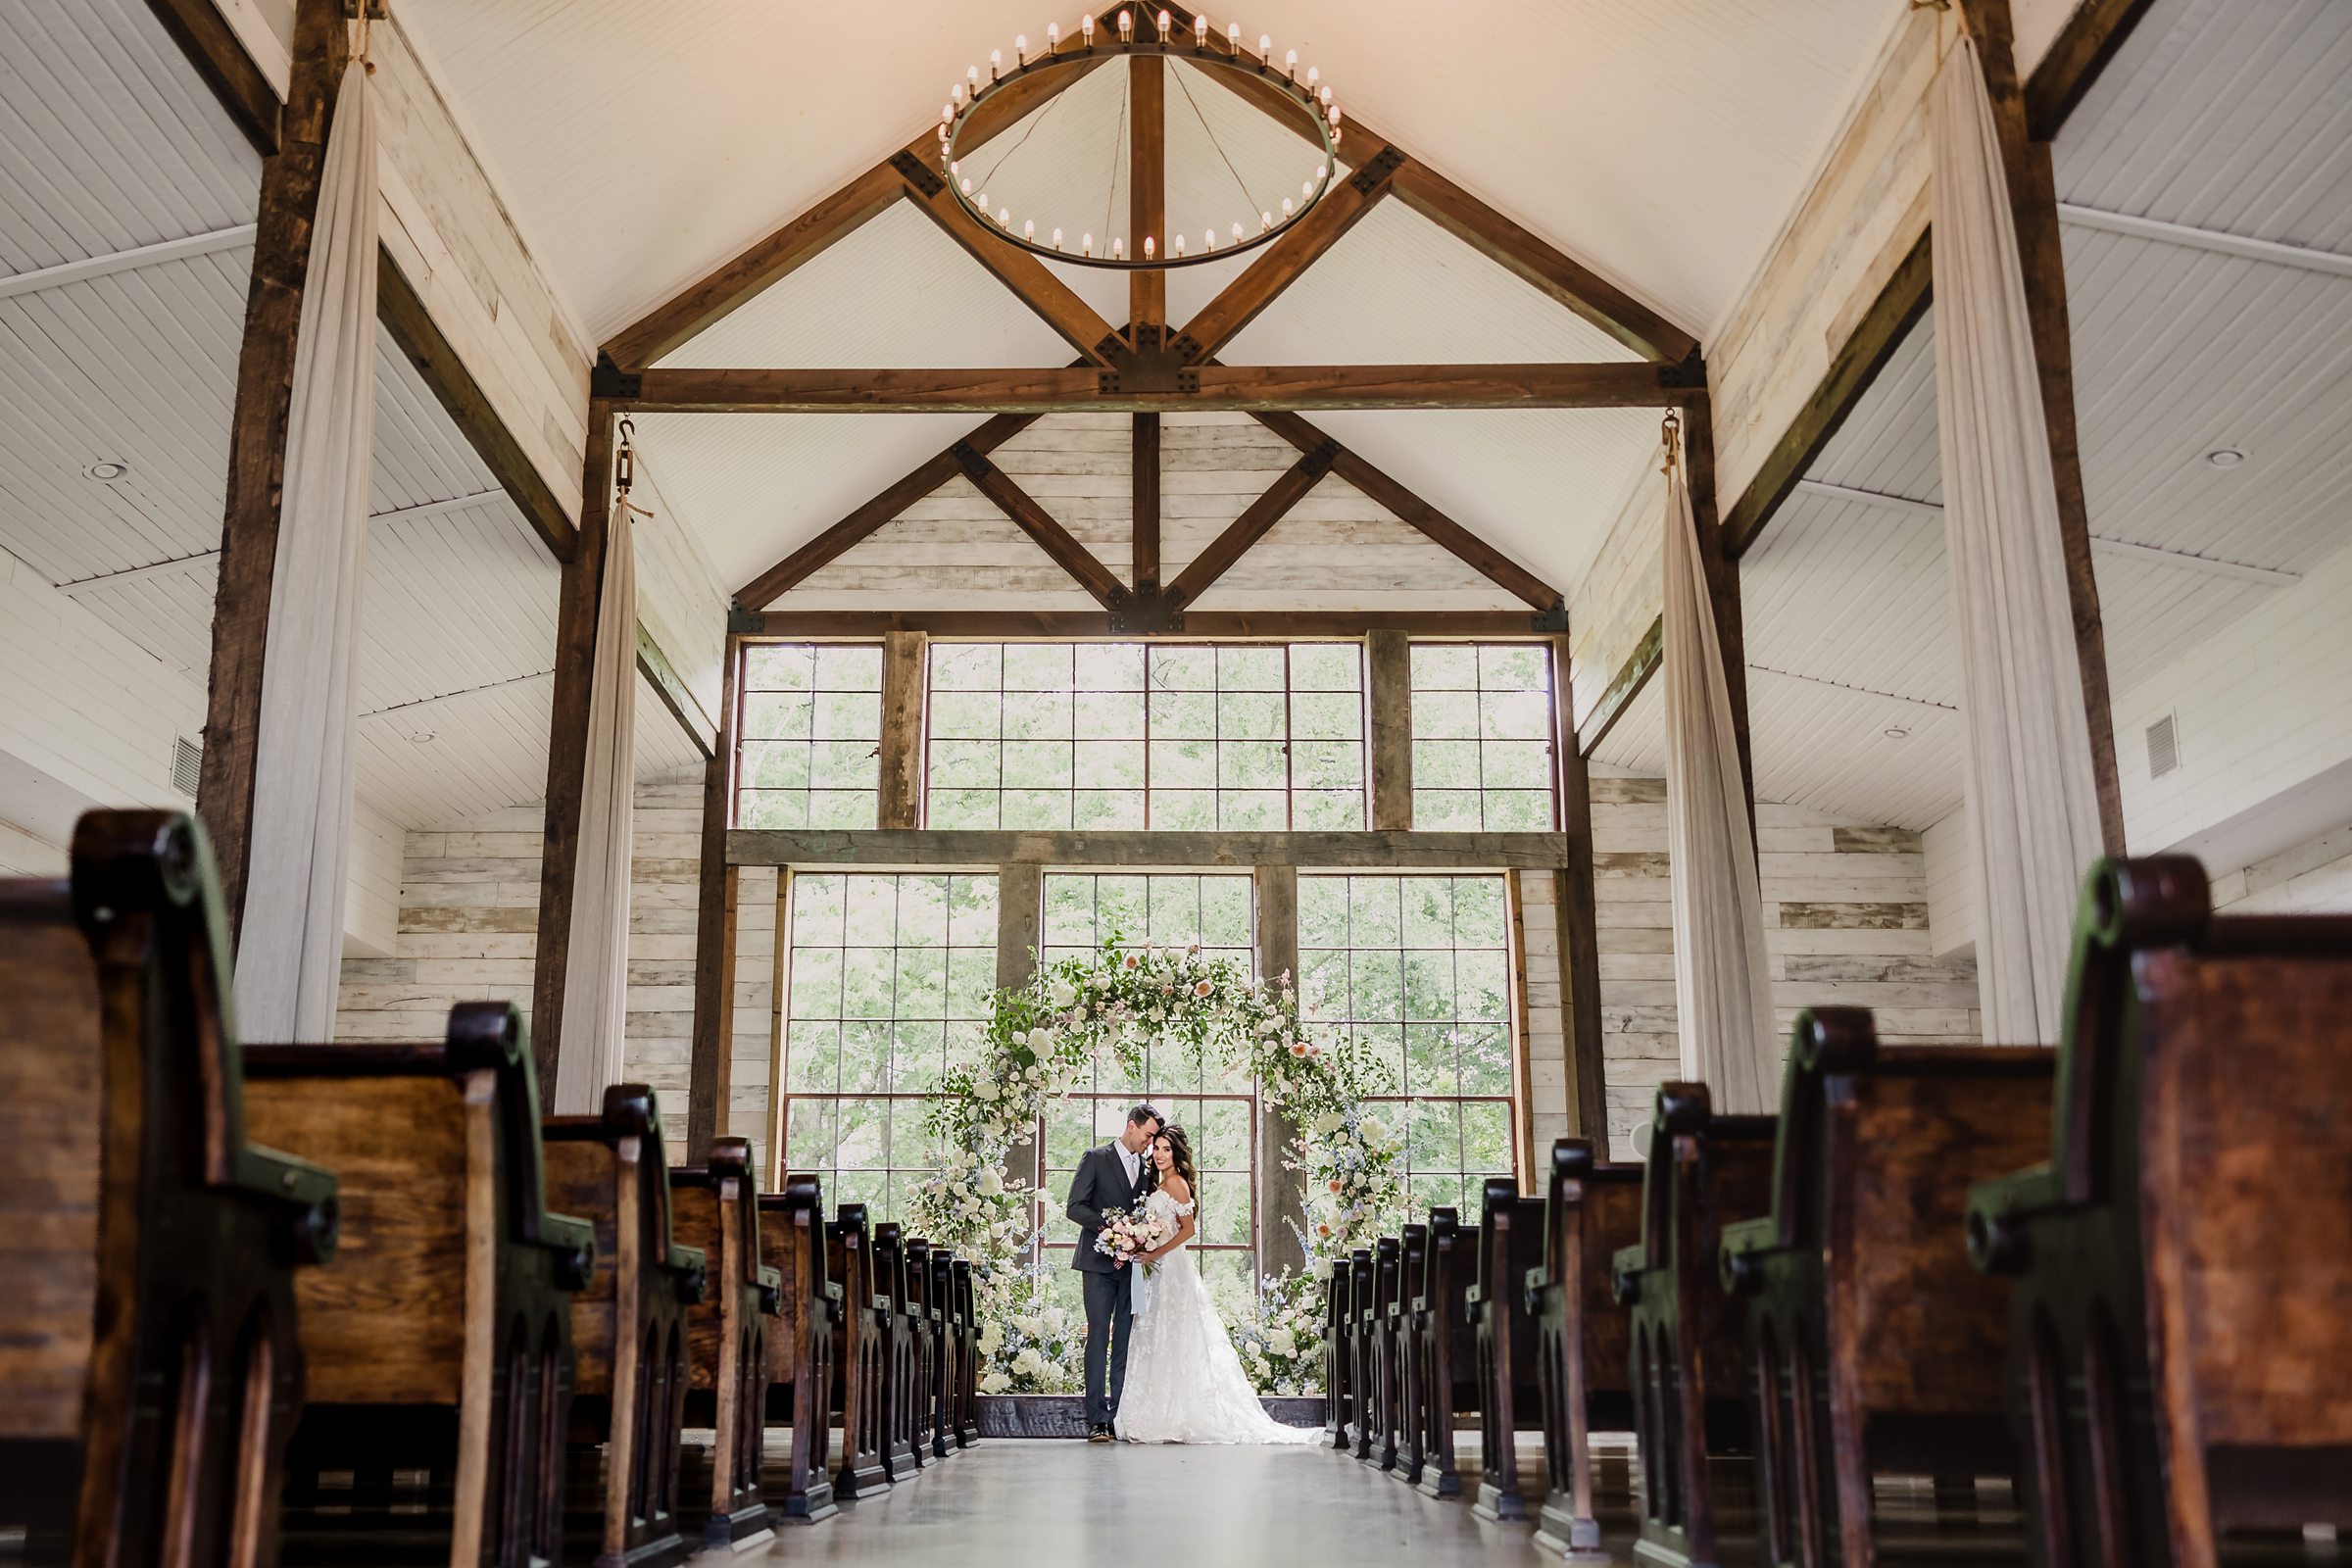 Bride and Groom celebrate their wedding at the Big Sky Barn in Montgomery, Texas.